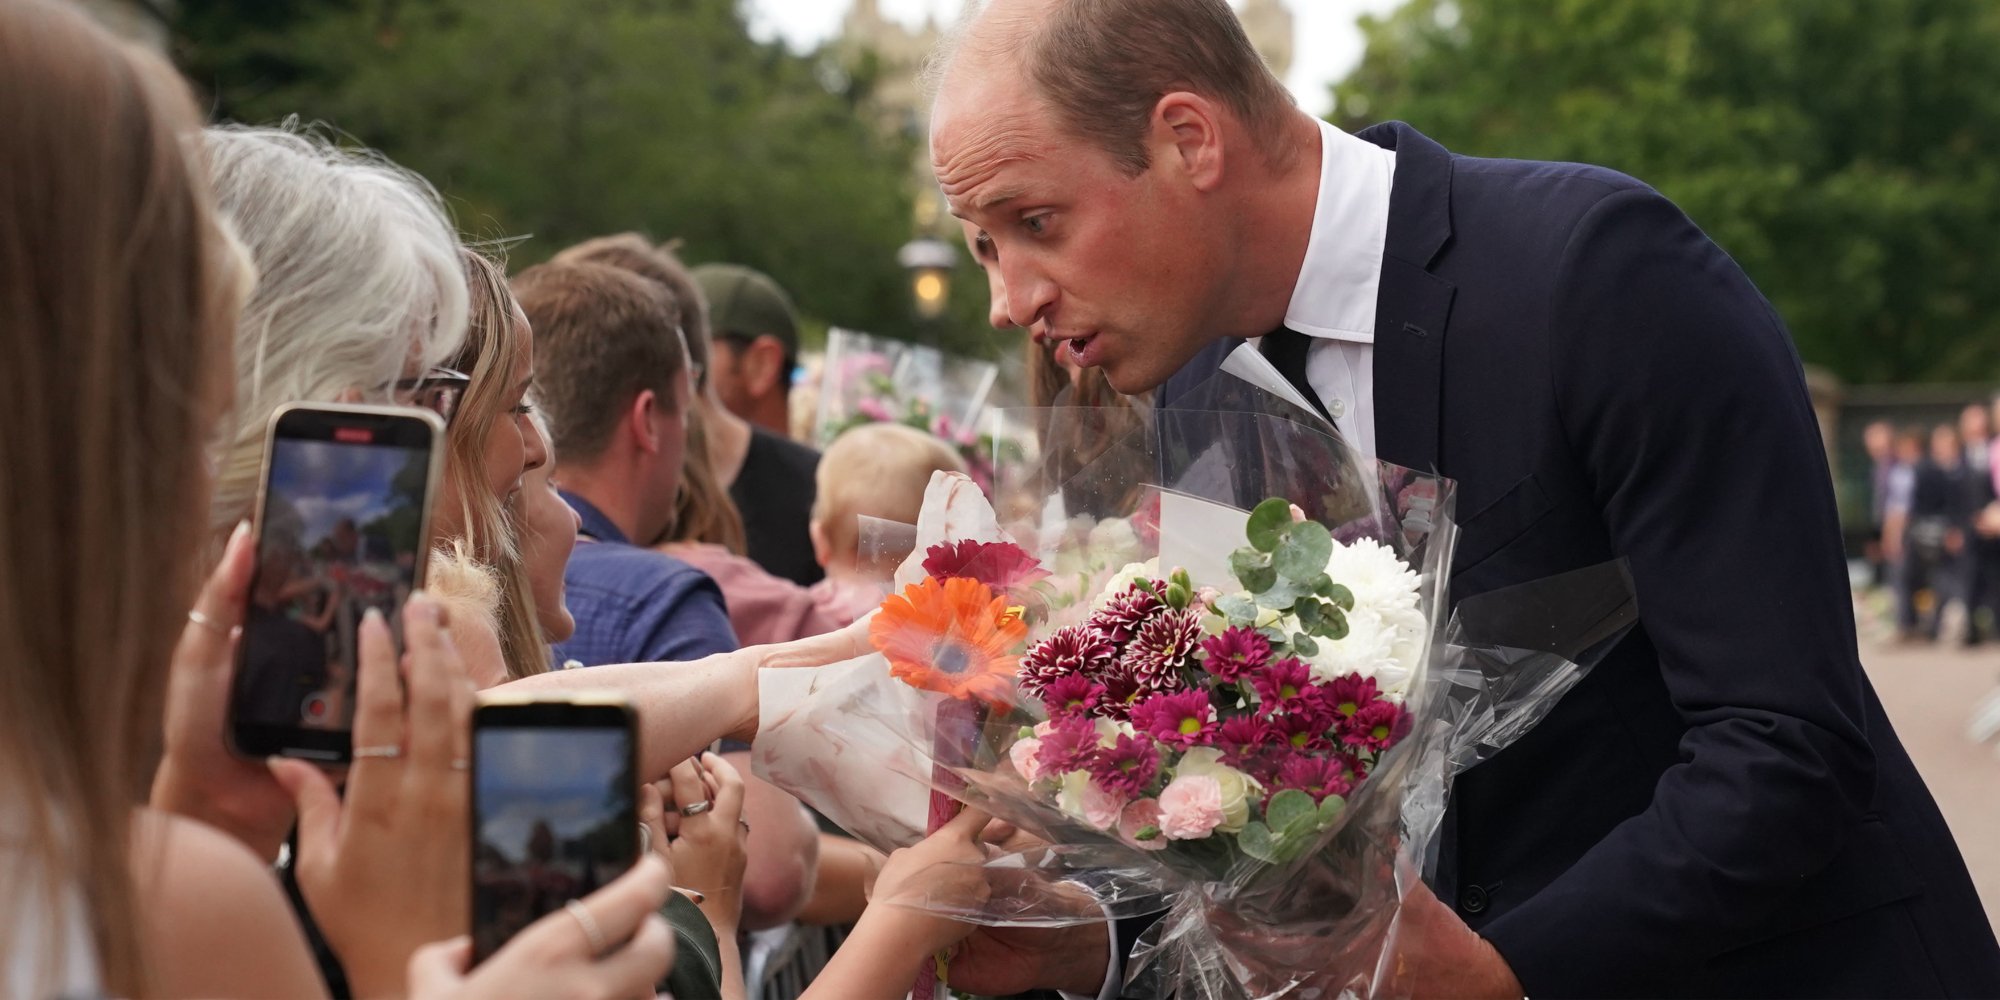 Prince William now presides over the Duchy of Cornwall, he greets mourners outside of Buckingham Palace after the death of Queen Elizabeth.